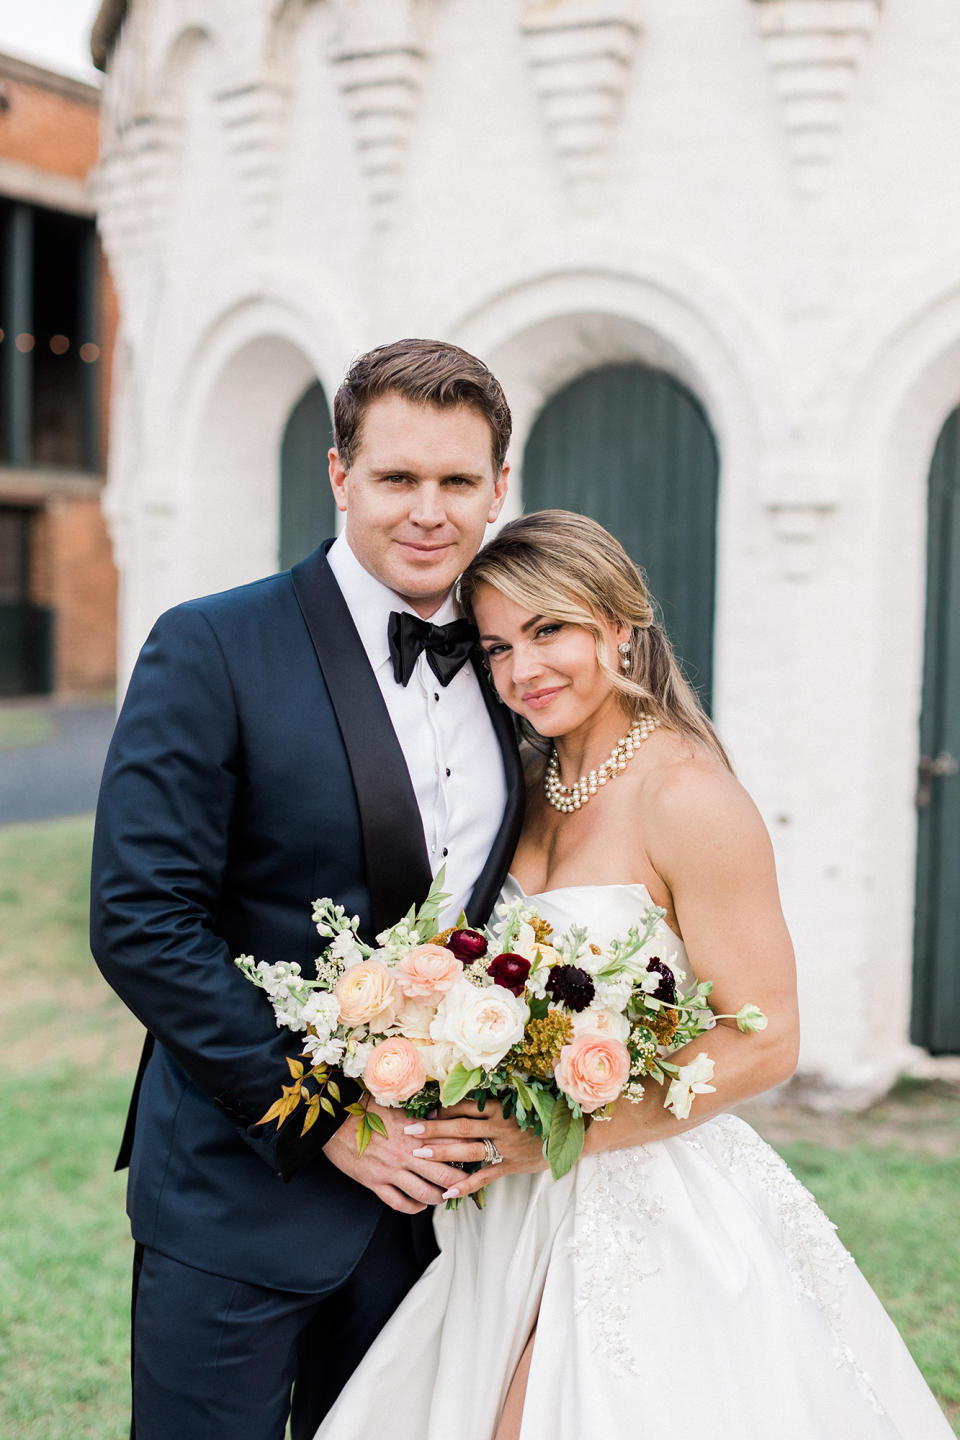 The Big Brother alums, who met while competing on 2020's season 22, tied the knot on May 28 in Savannah, Georgia.